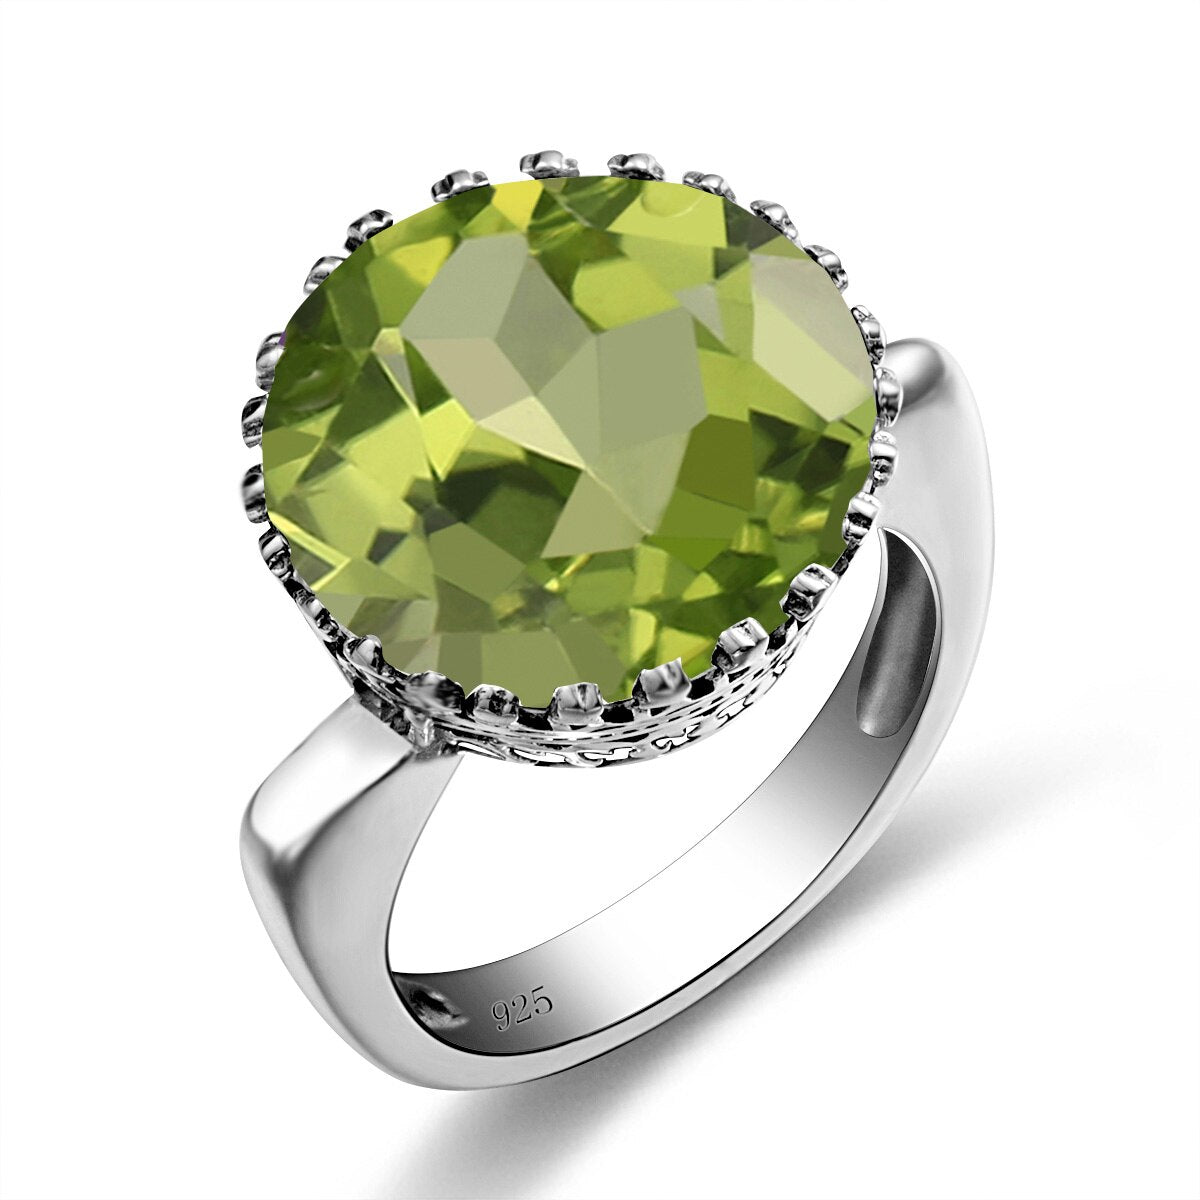 Szjinao Vintage 100% 925 Sterling Silver 15ct Round Created Aquamarine Ring For Women Famous Branded Handmade Fine Jewelery 2021 Peridot